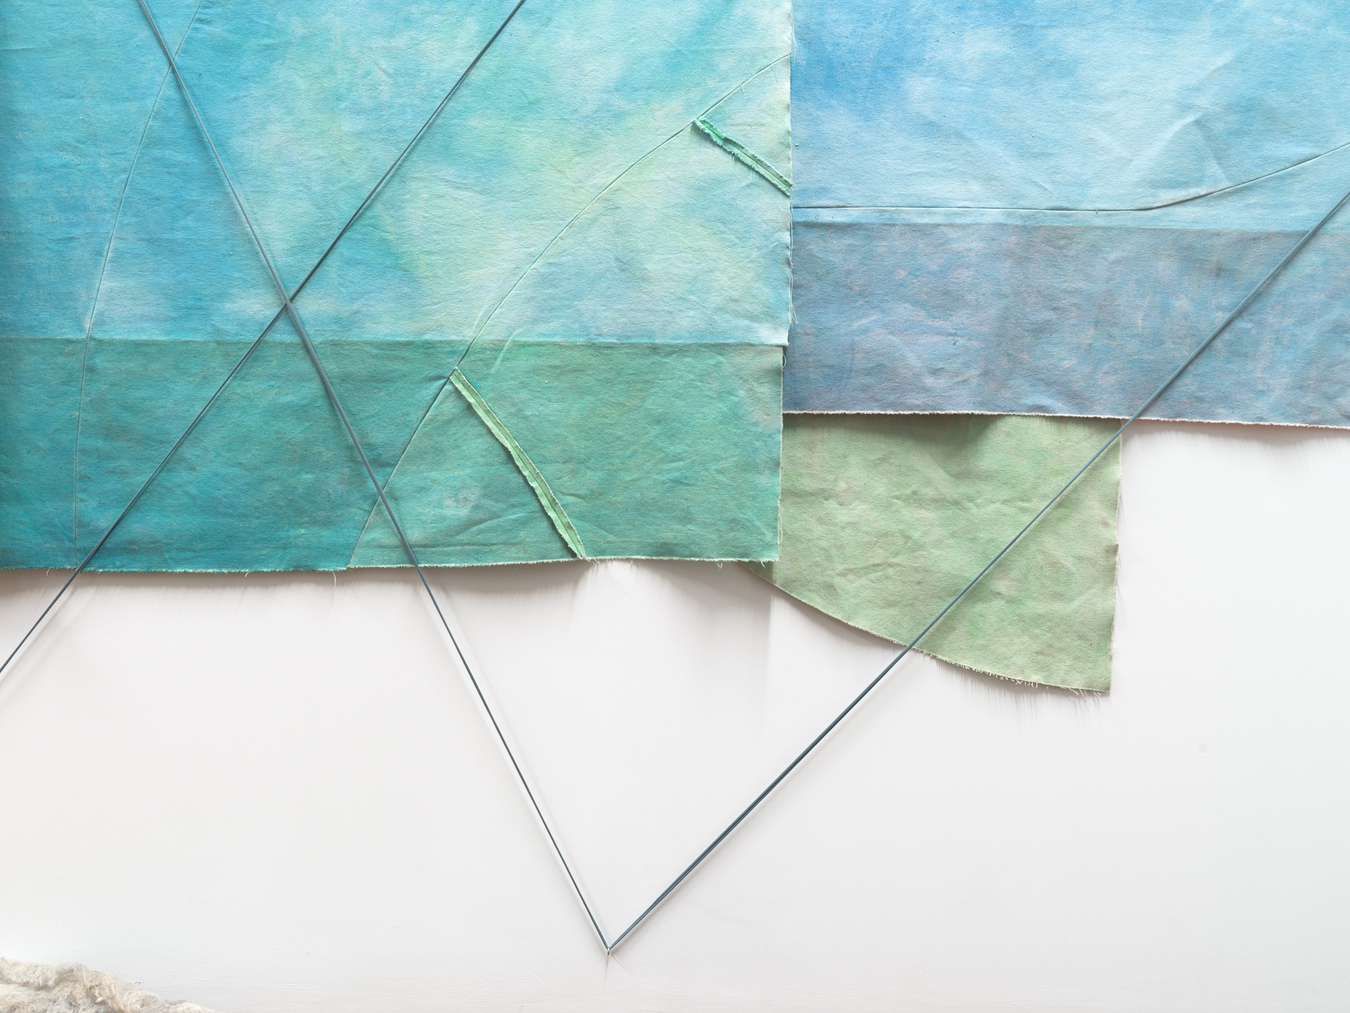 Image: Emma Fitts, From heat to translucence / your mineral touch (detail), 2023. Weathered canvas, felted wool, aluminium and wooden rods, fabric ties. Photo by John Collie.